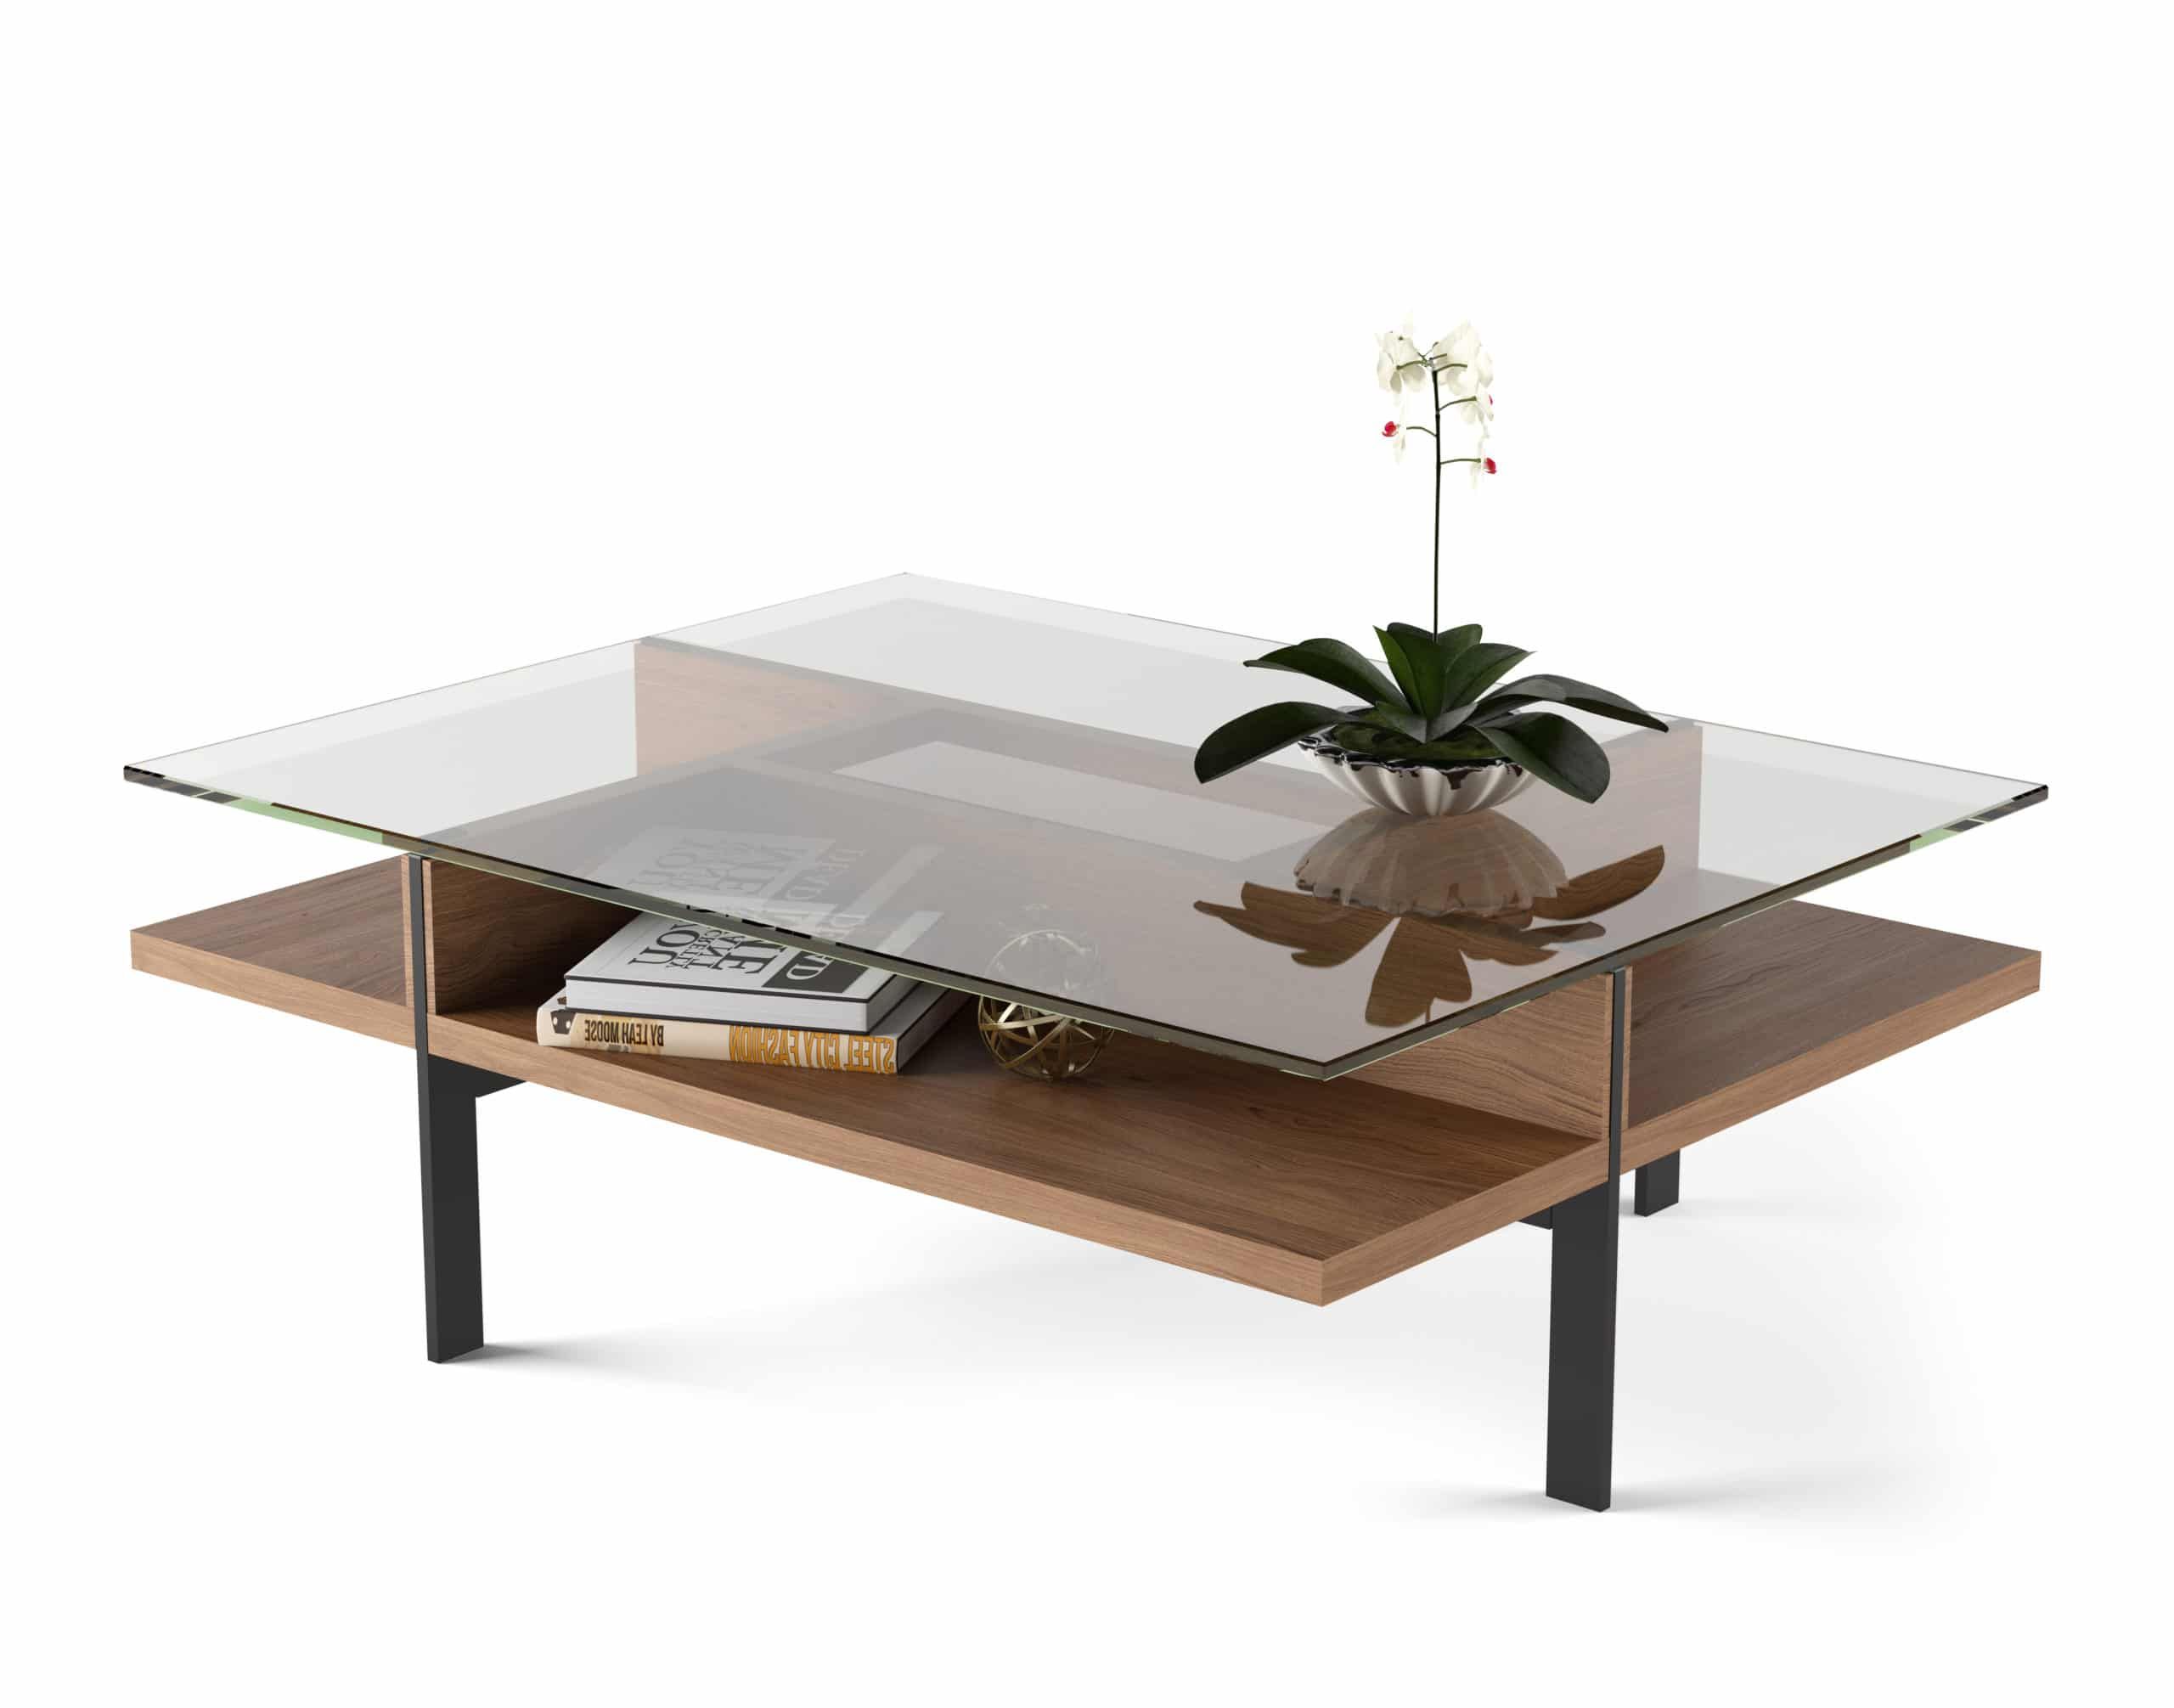 Bdi Furniture For Most Up To Date Geometric Glass Modern Coffee Tables (View 9 of 10)